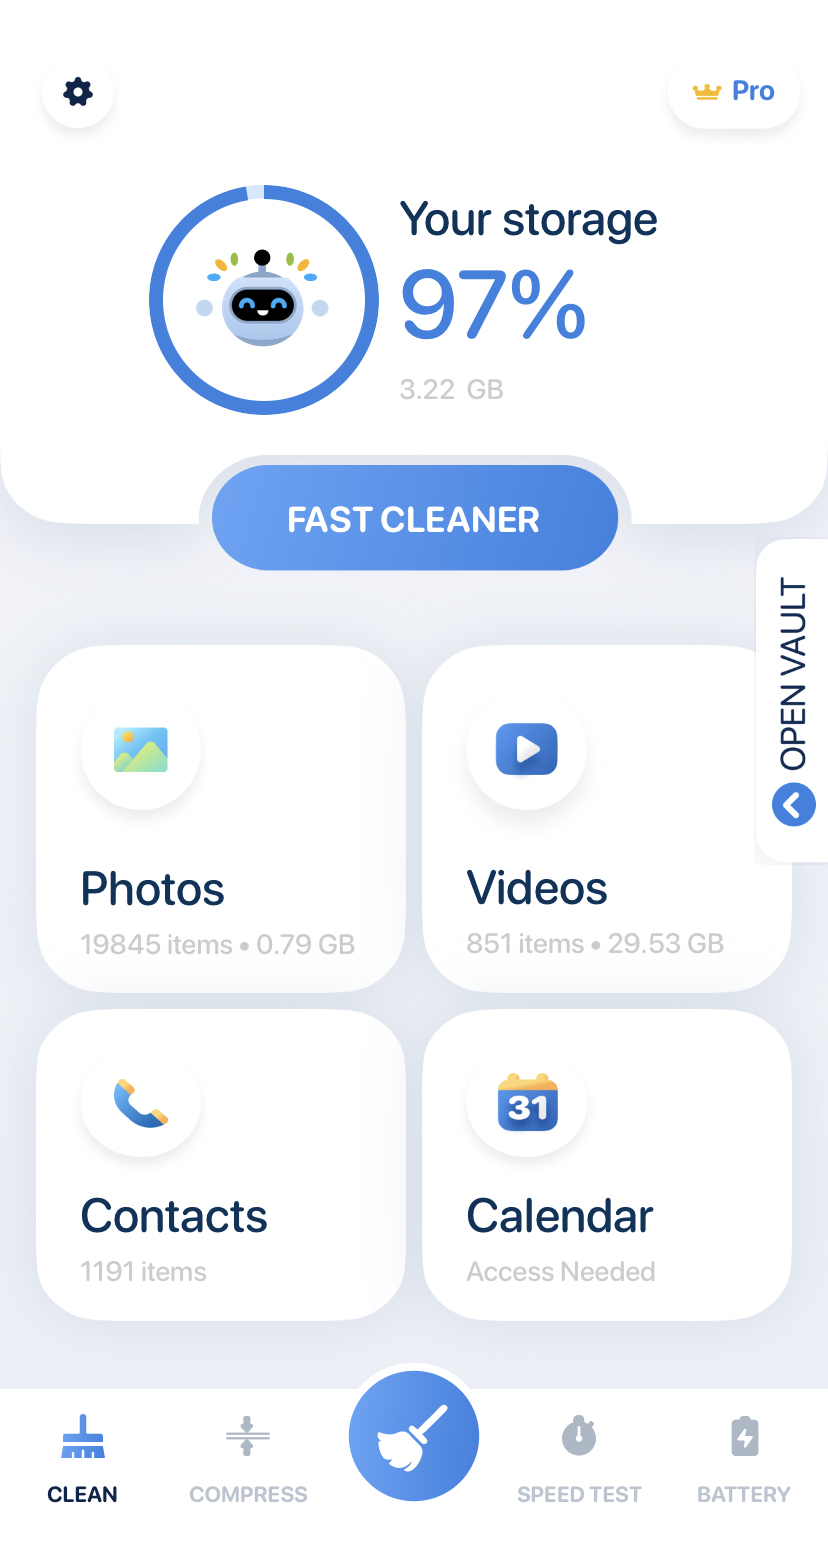 boost cleaner for deleting photos